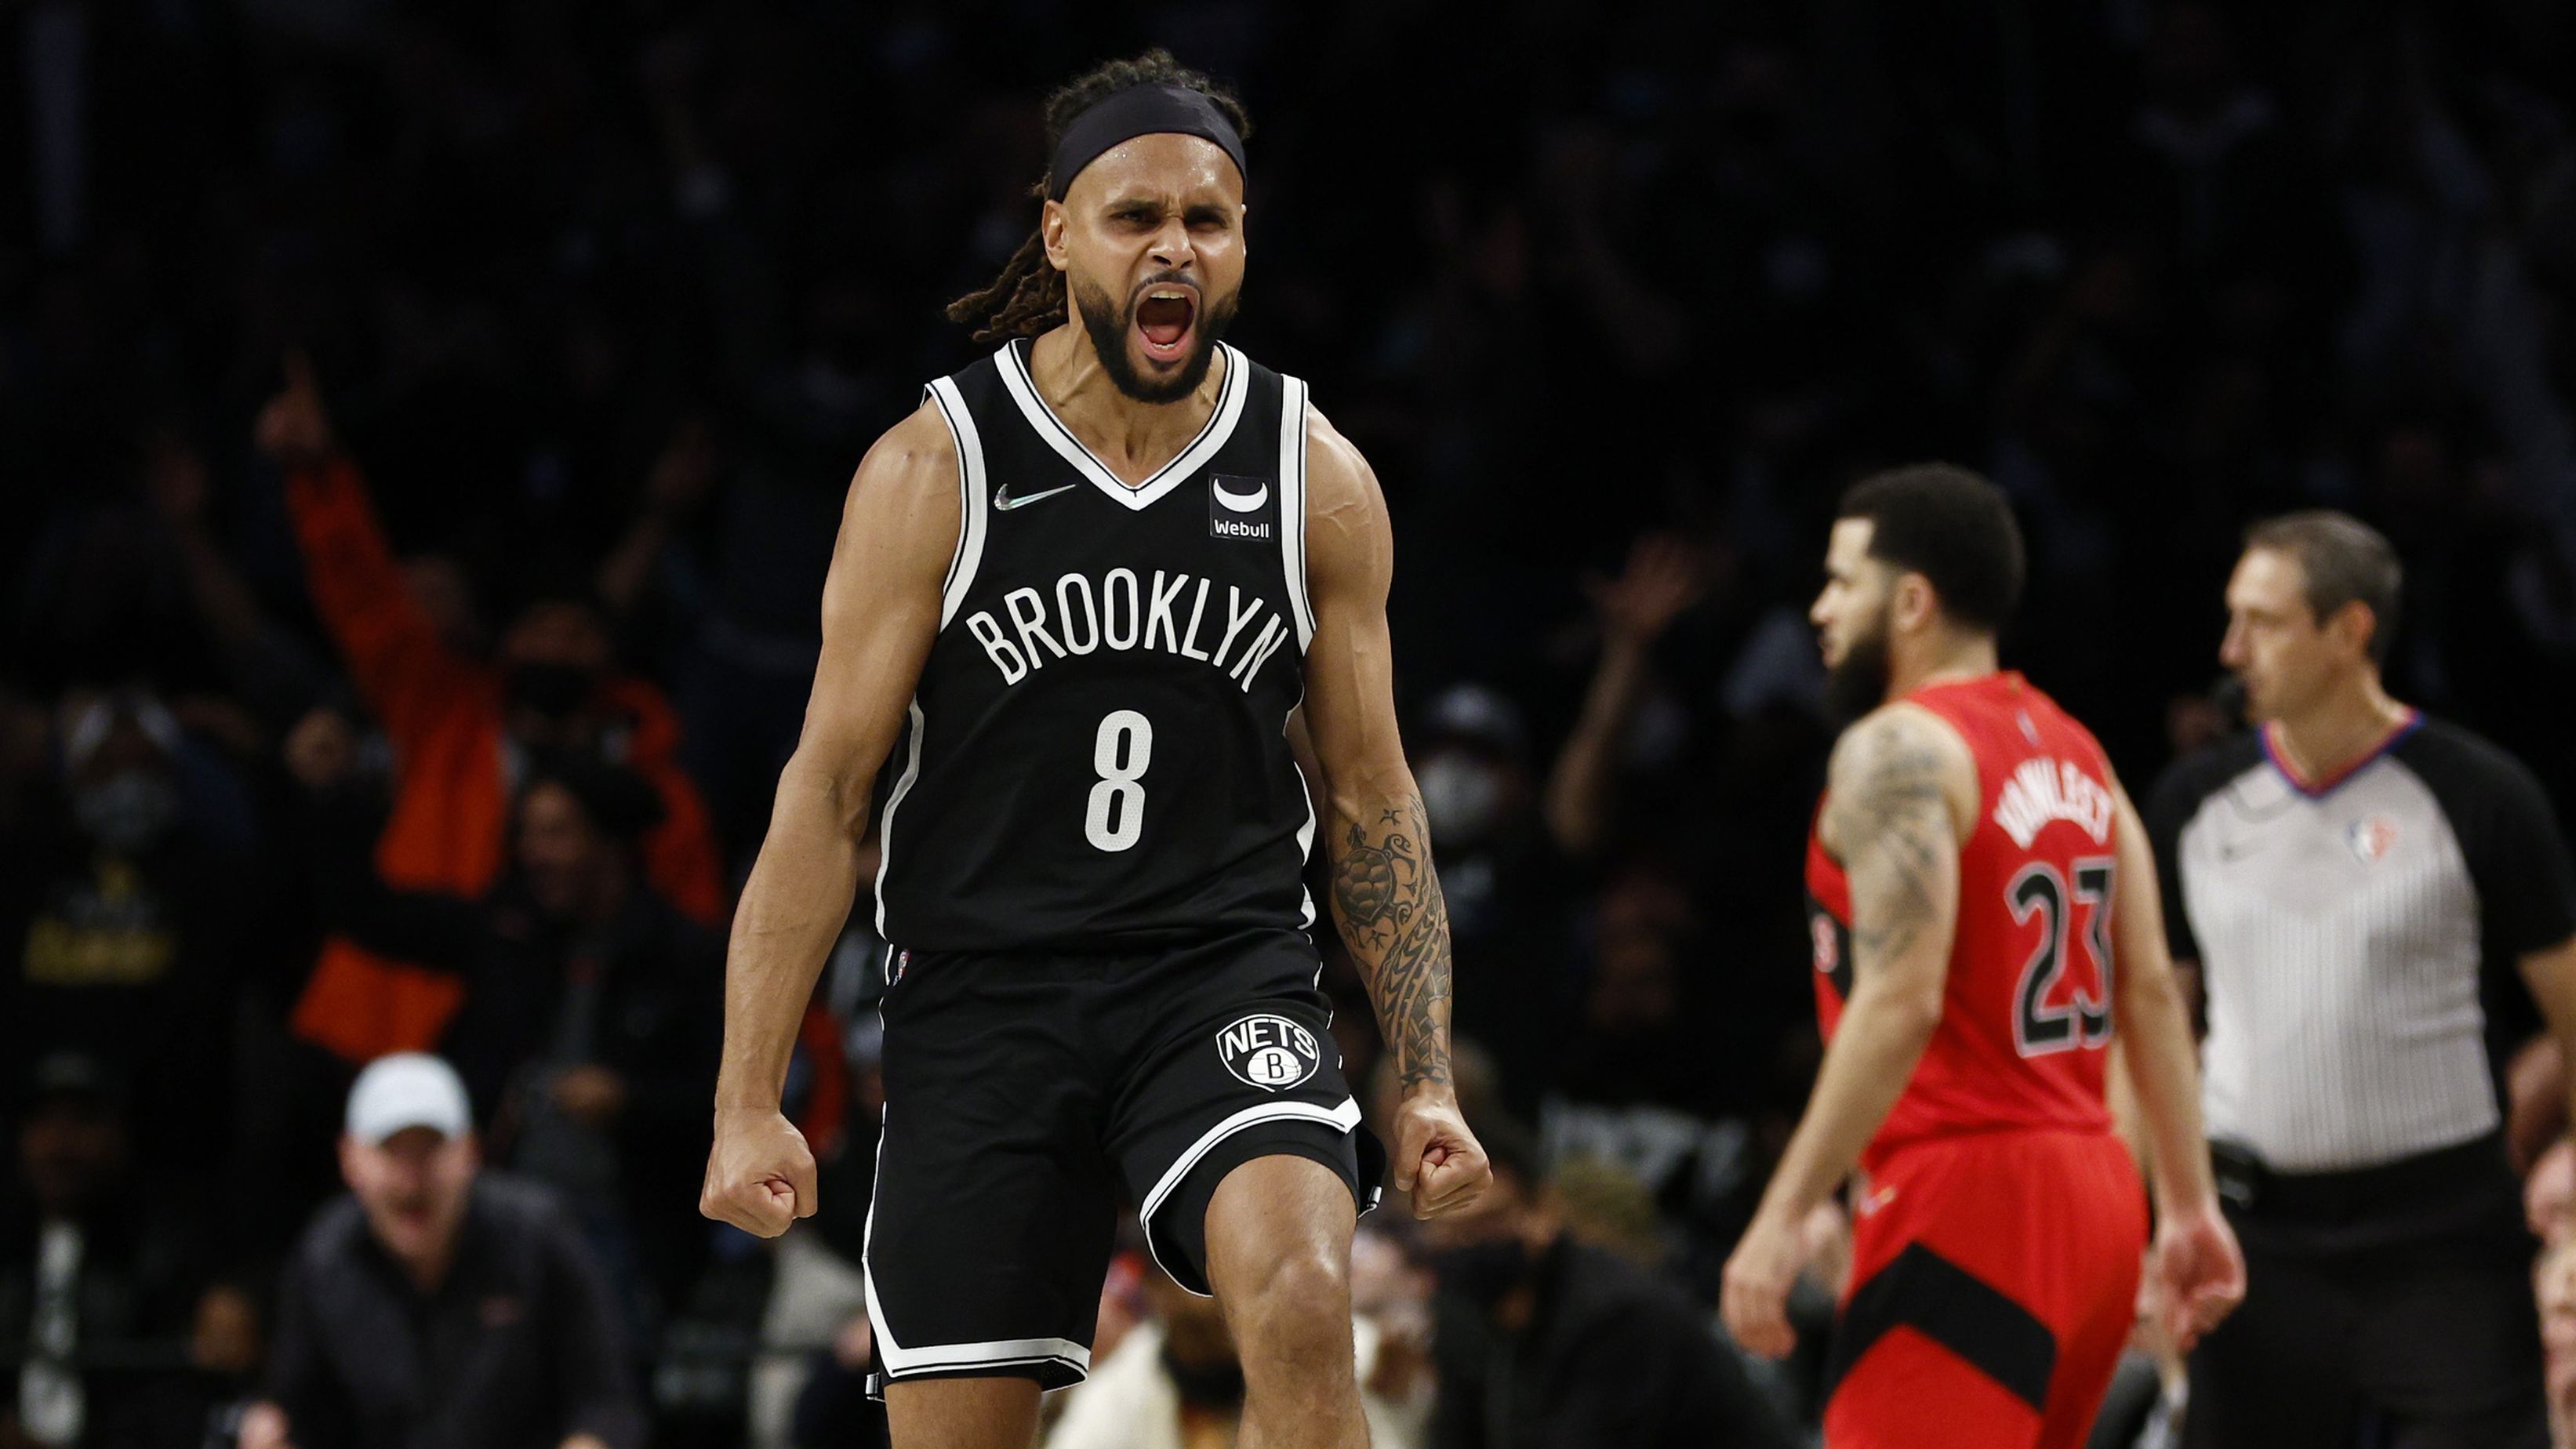 Aussie superstar Patty Mills goes bonkers to seal comeback win for Brooklyn Nets